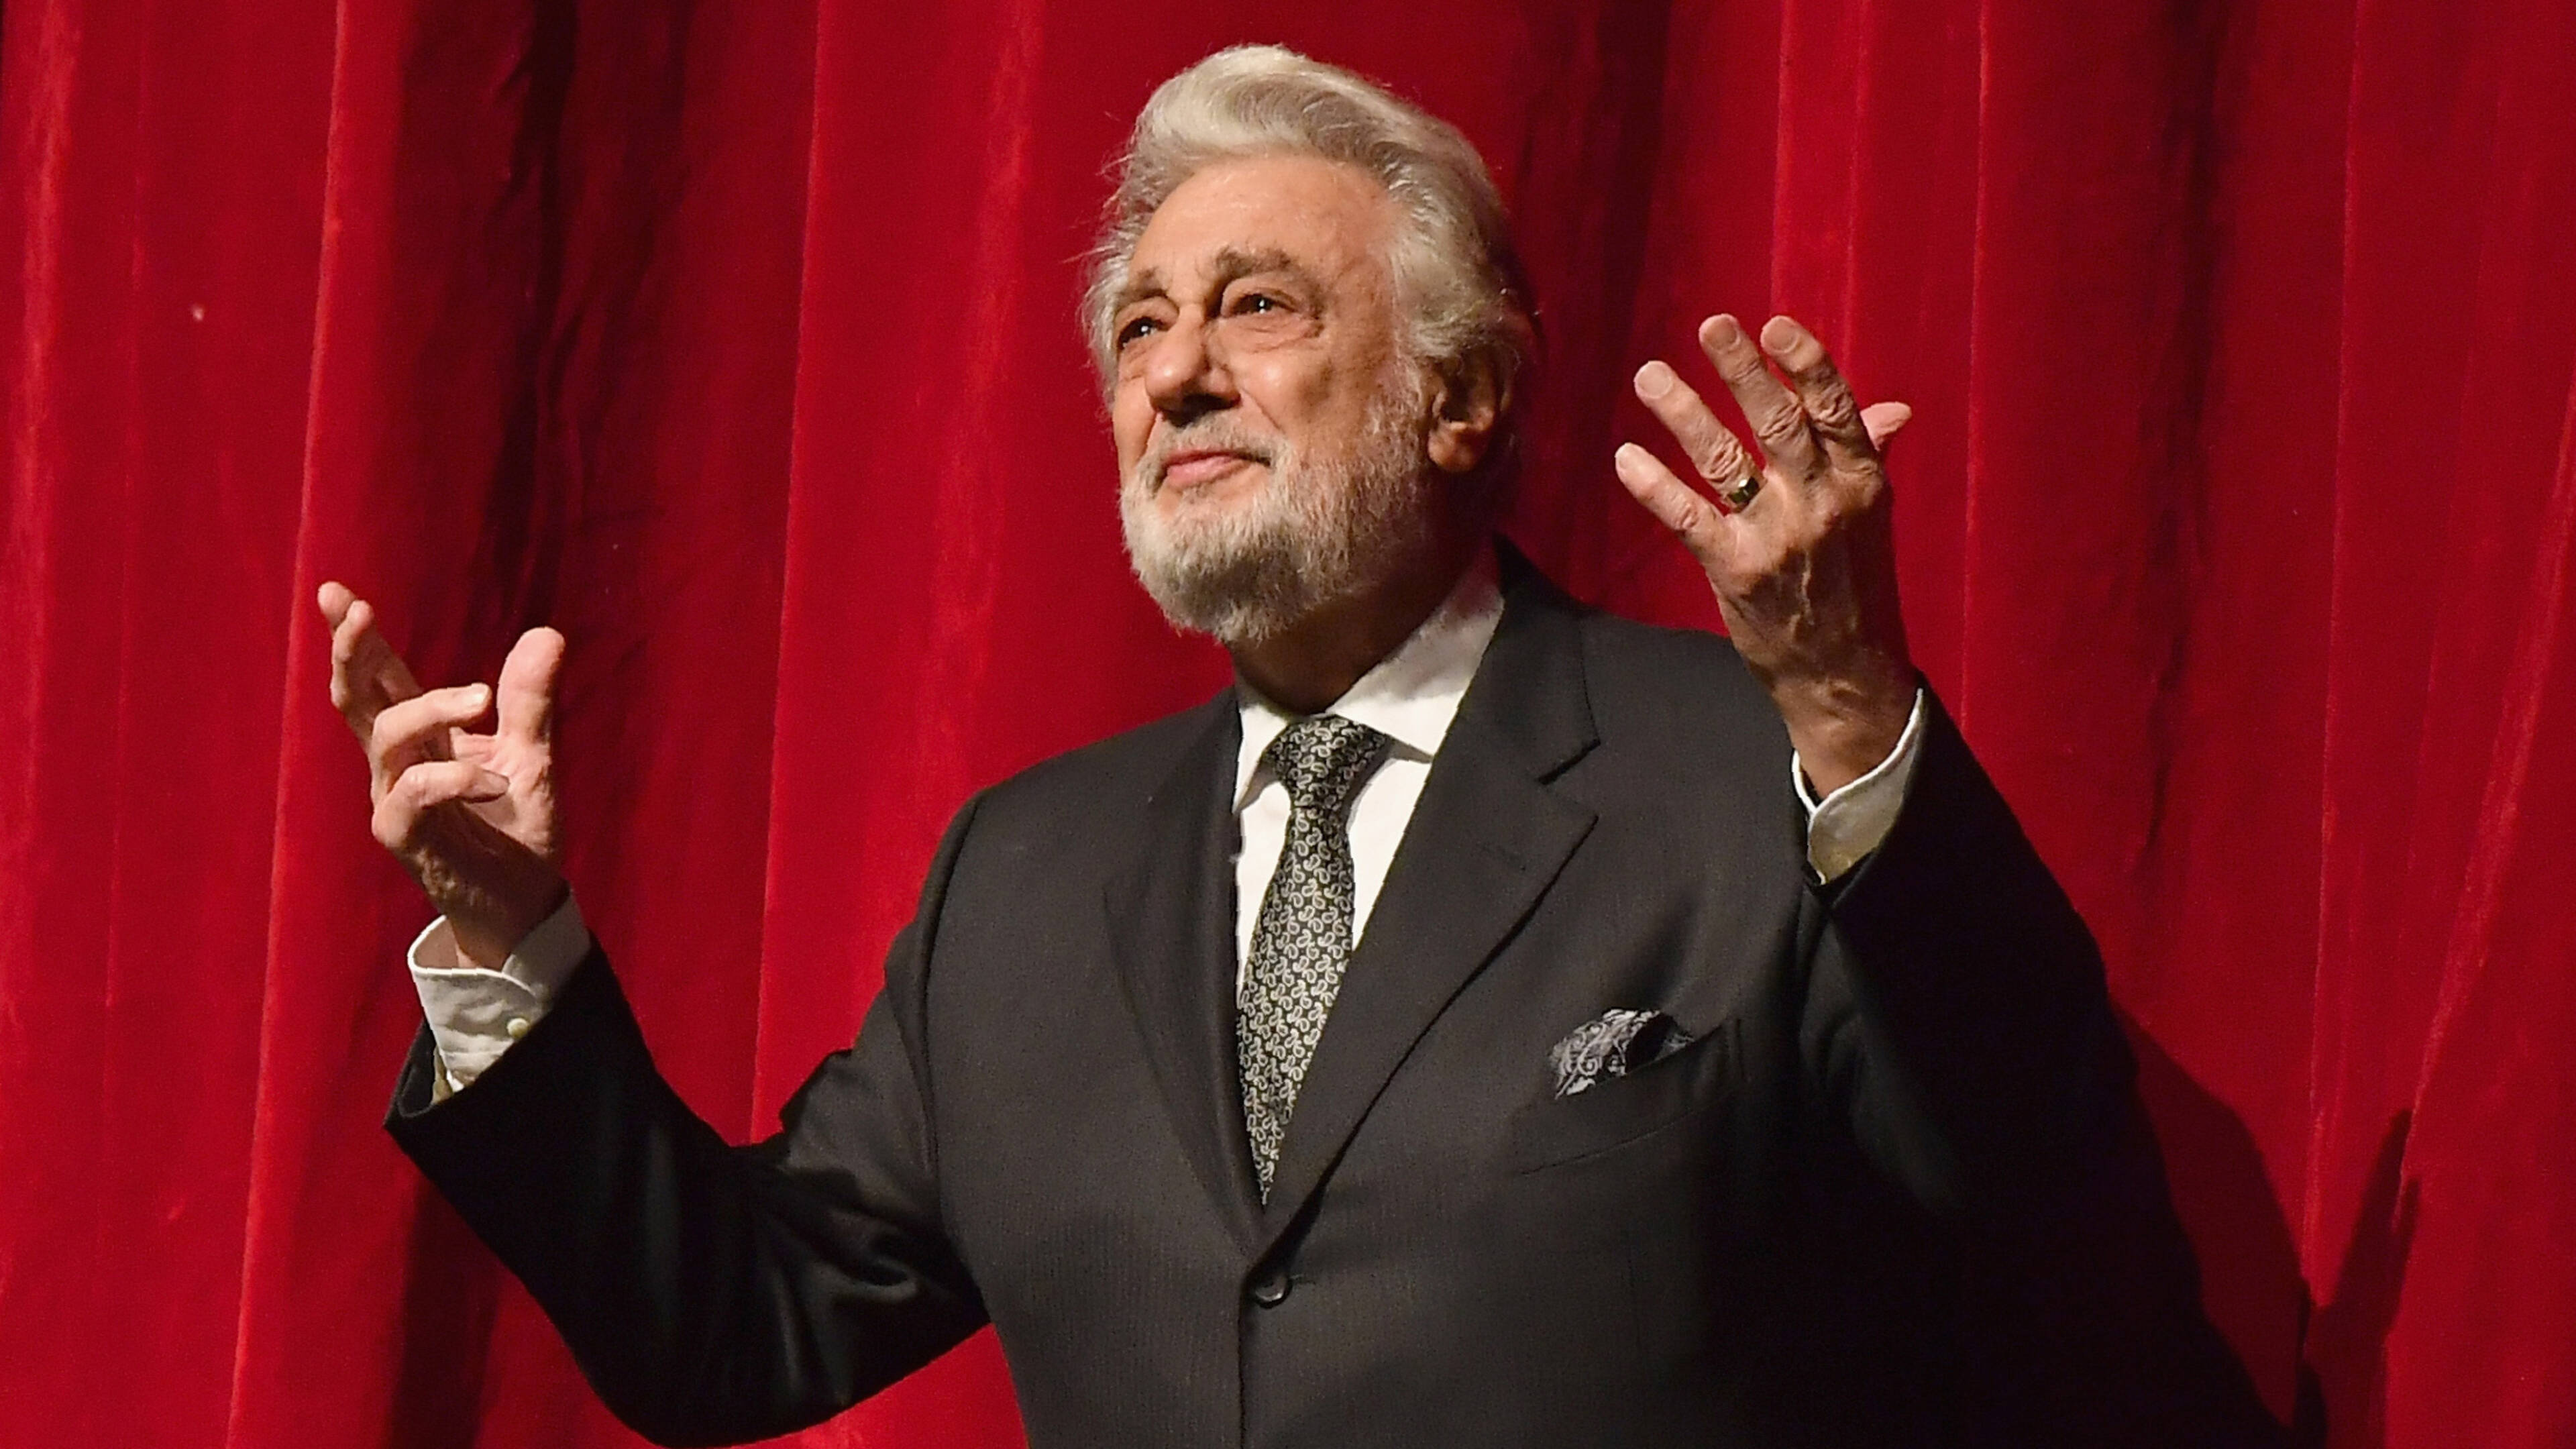 Placido Domingo, Performance cancellation, Admission of misconduct, Personal accountability, 3840x2160 4K Desktop